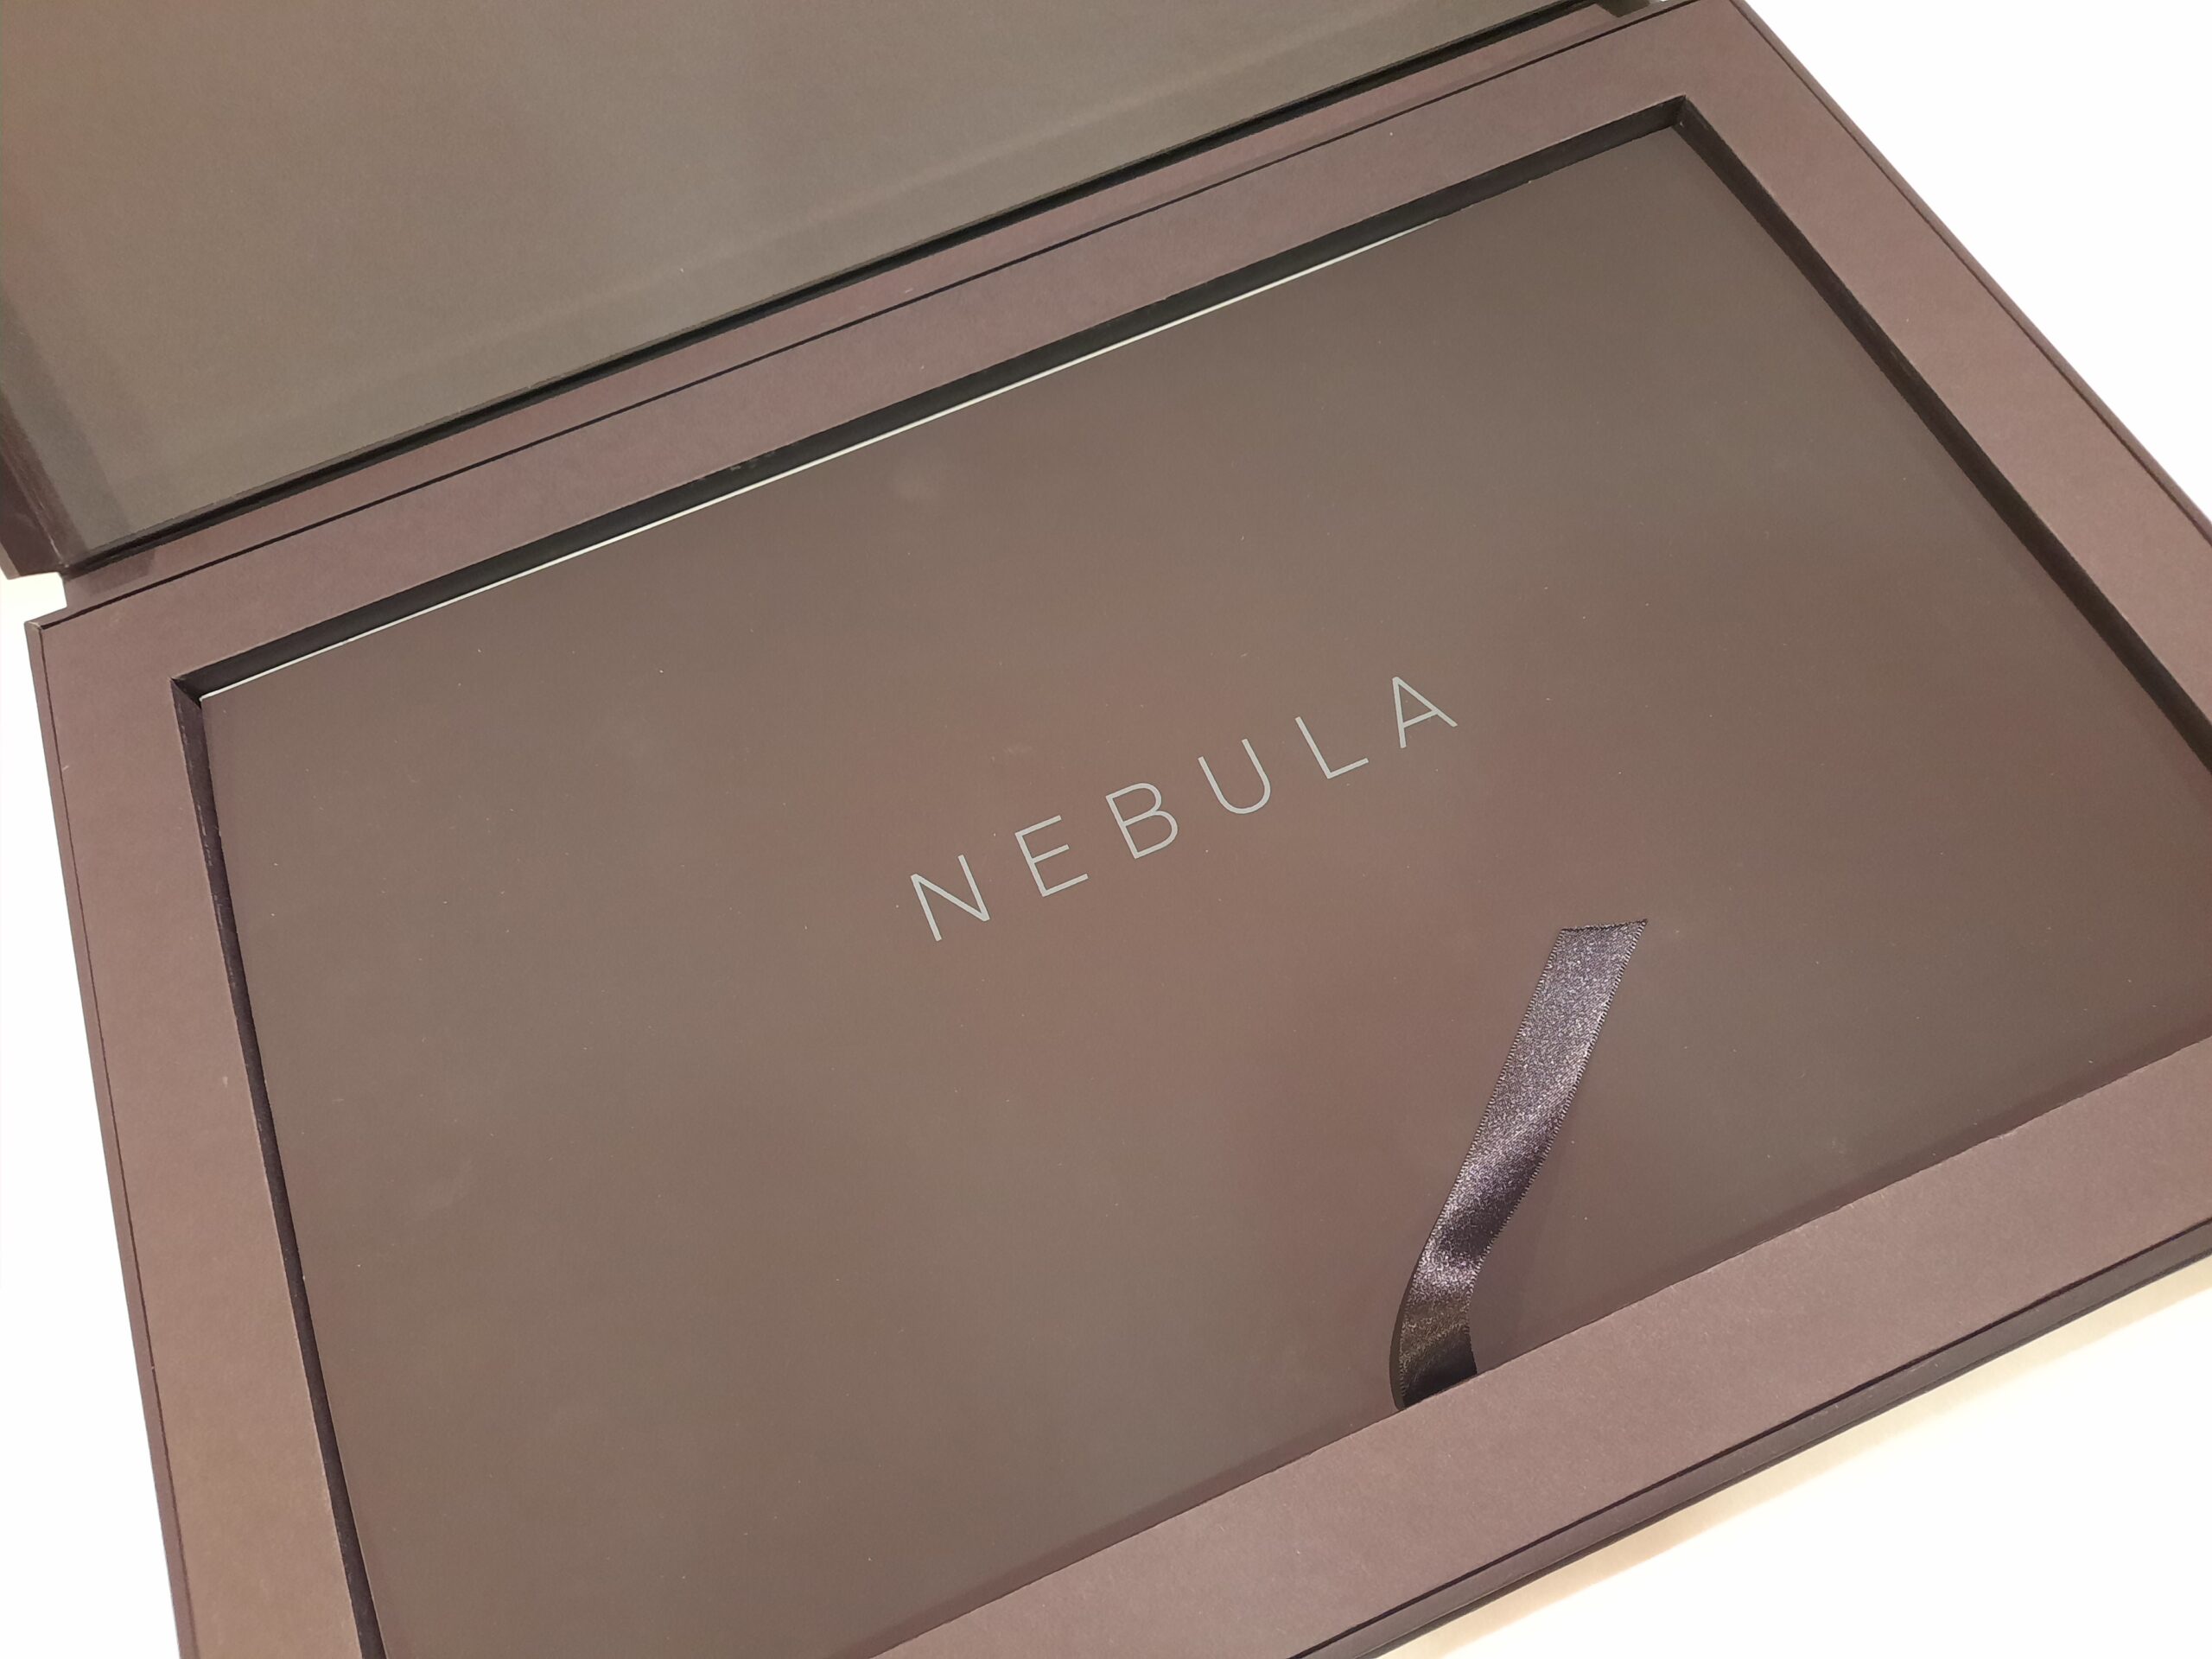 Image shows the Nebula Collaboration Presentation Box, a large black rectangle with an internal rectangular space for large cards about the Nebula Collaboration